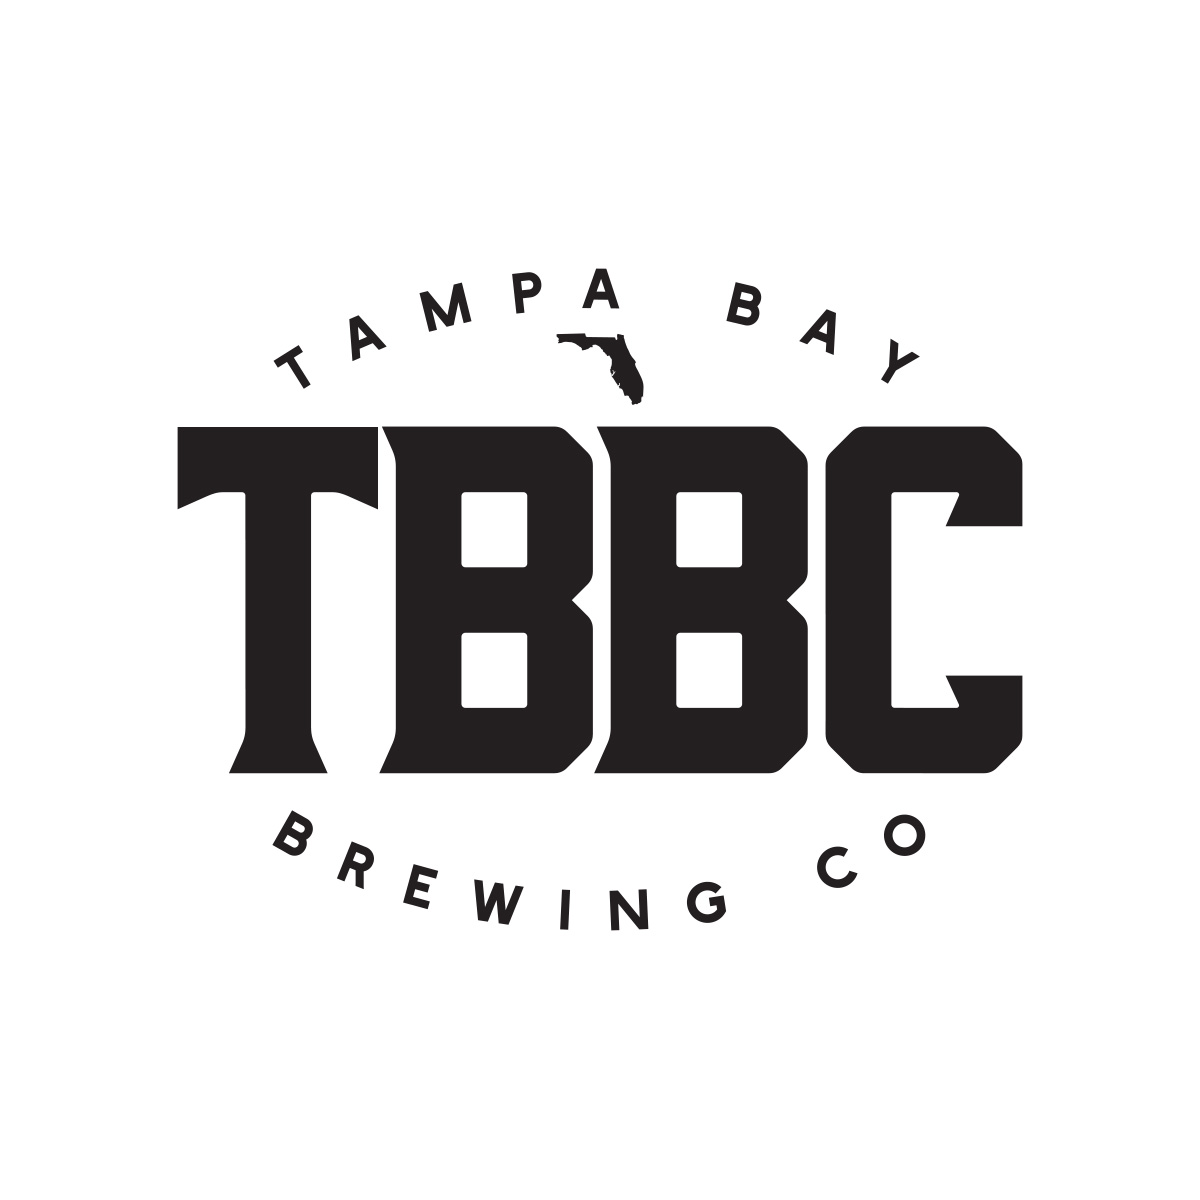 Tampa Bay Brewing Co